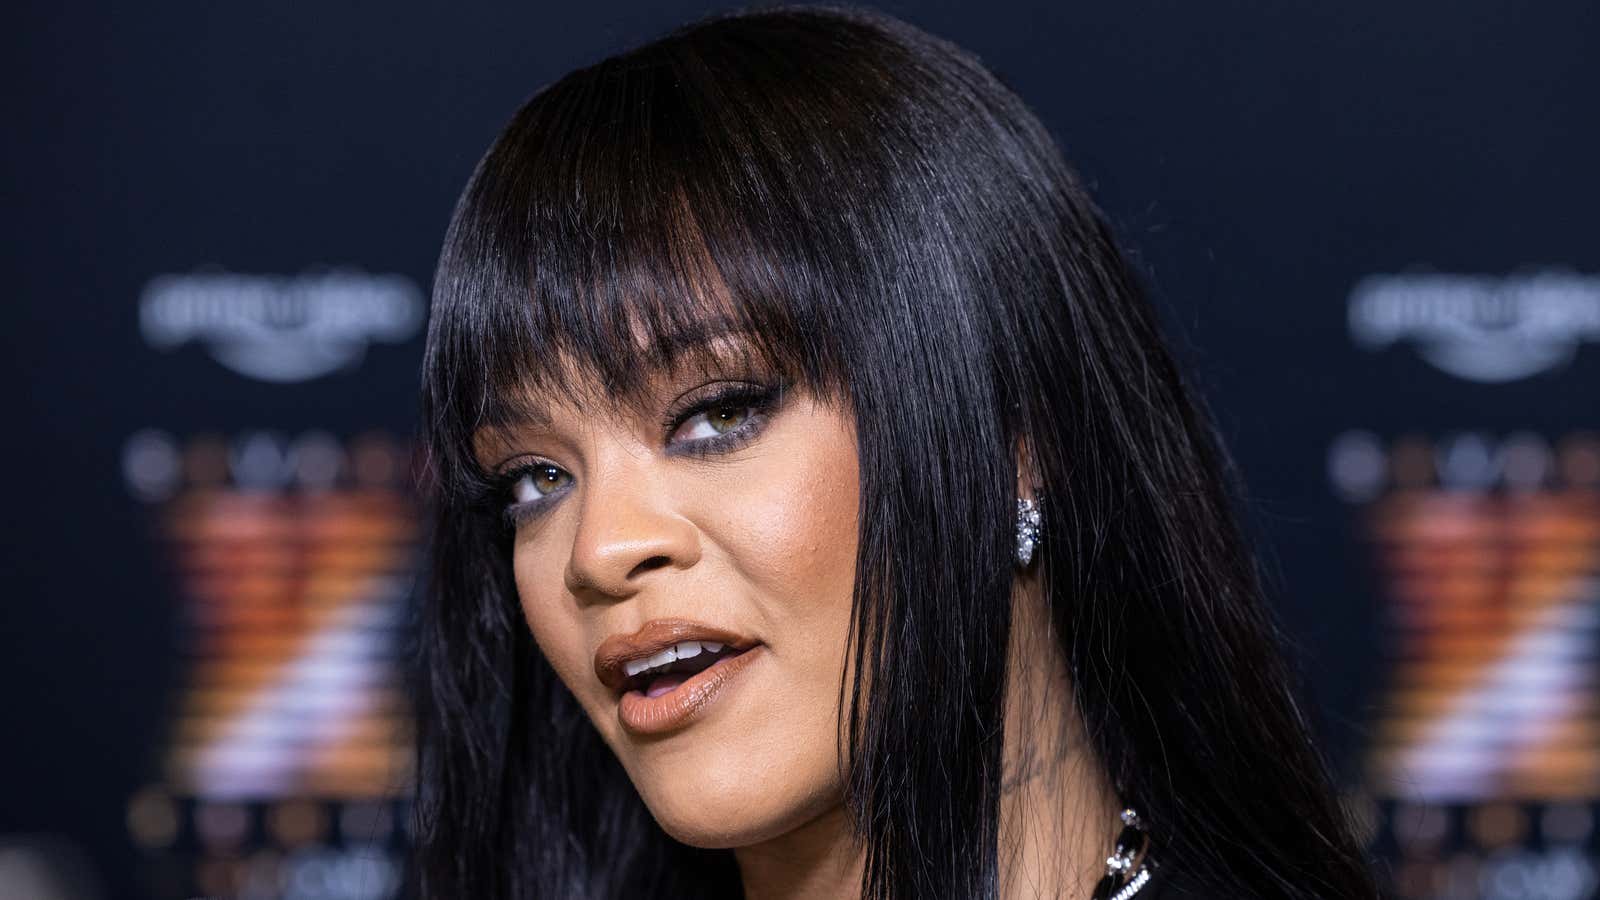 Rihanna's lingerie IPO could add another billion to her fortune